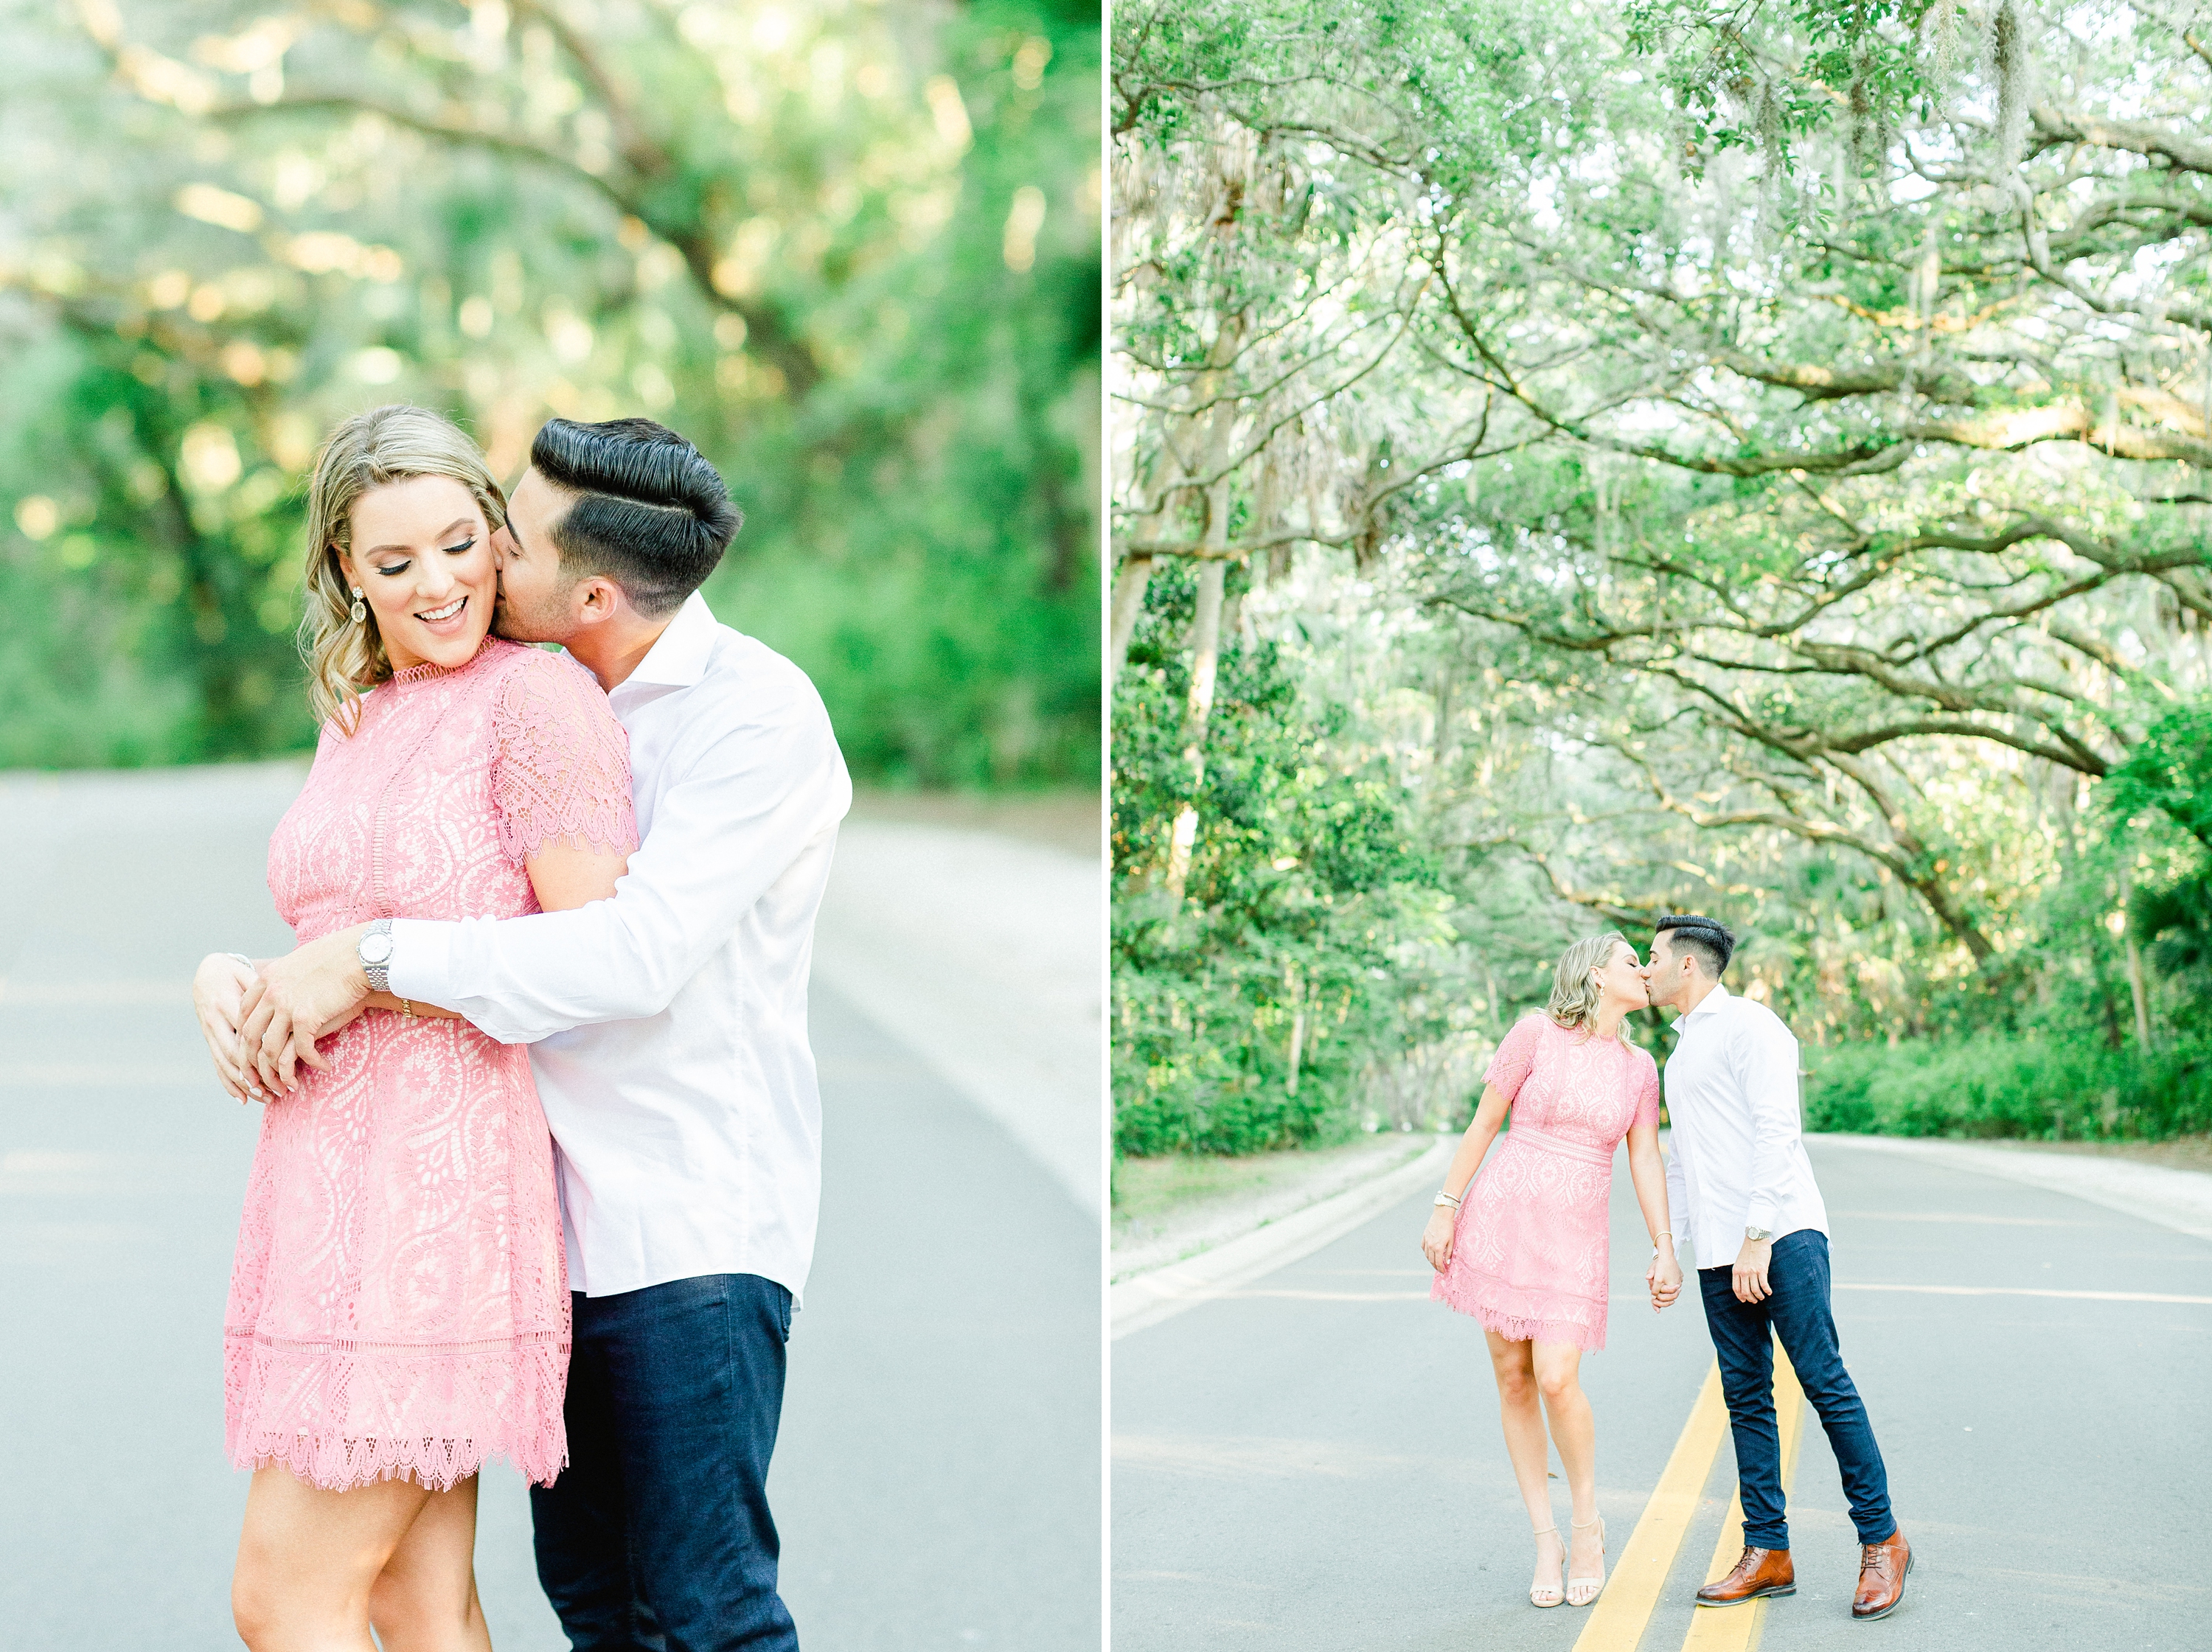 Tampa Engagement Photographer | © Ailyn La Torre Photography 2019